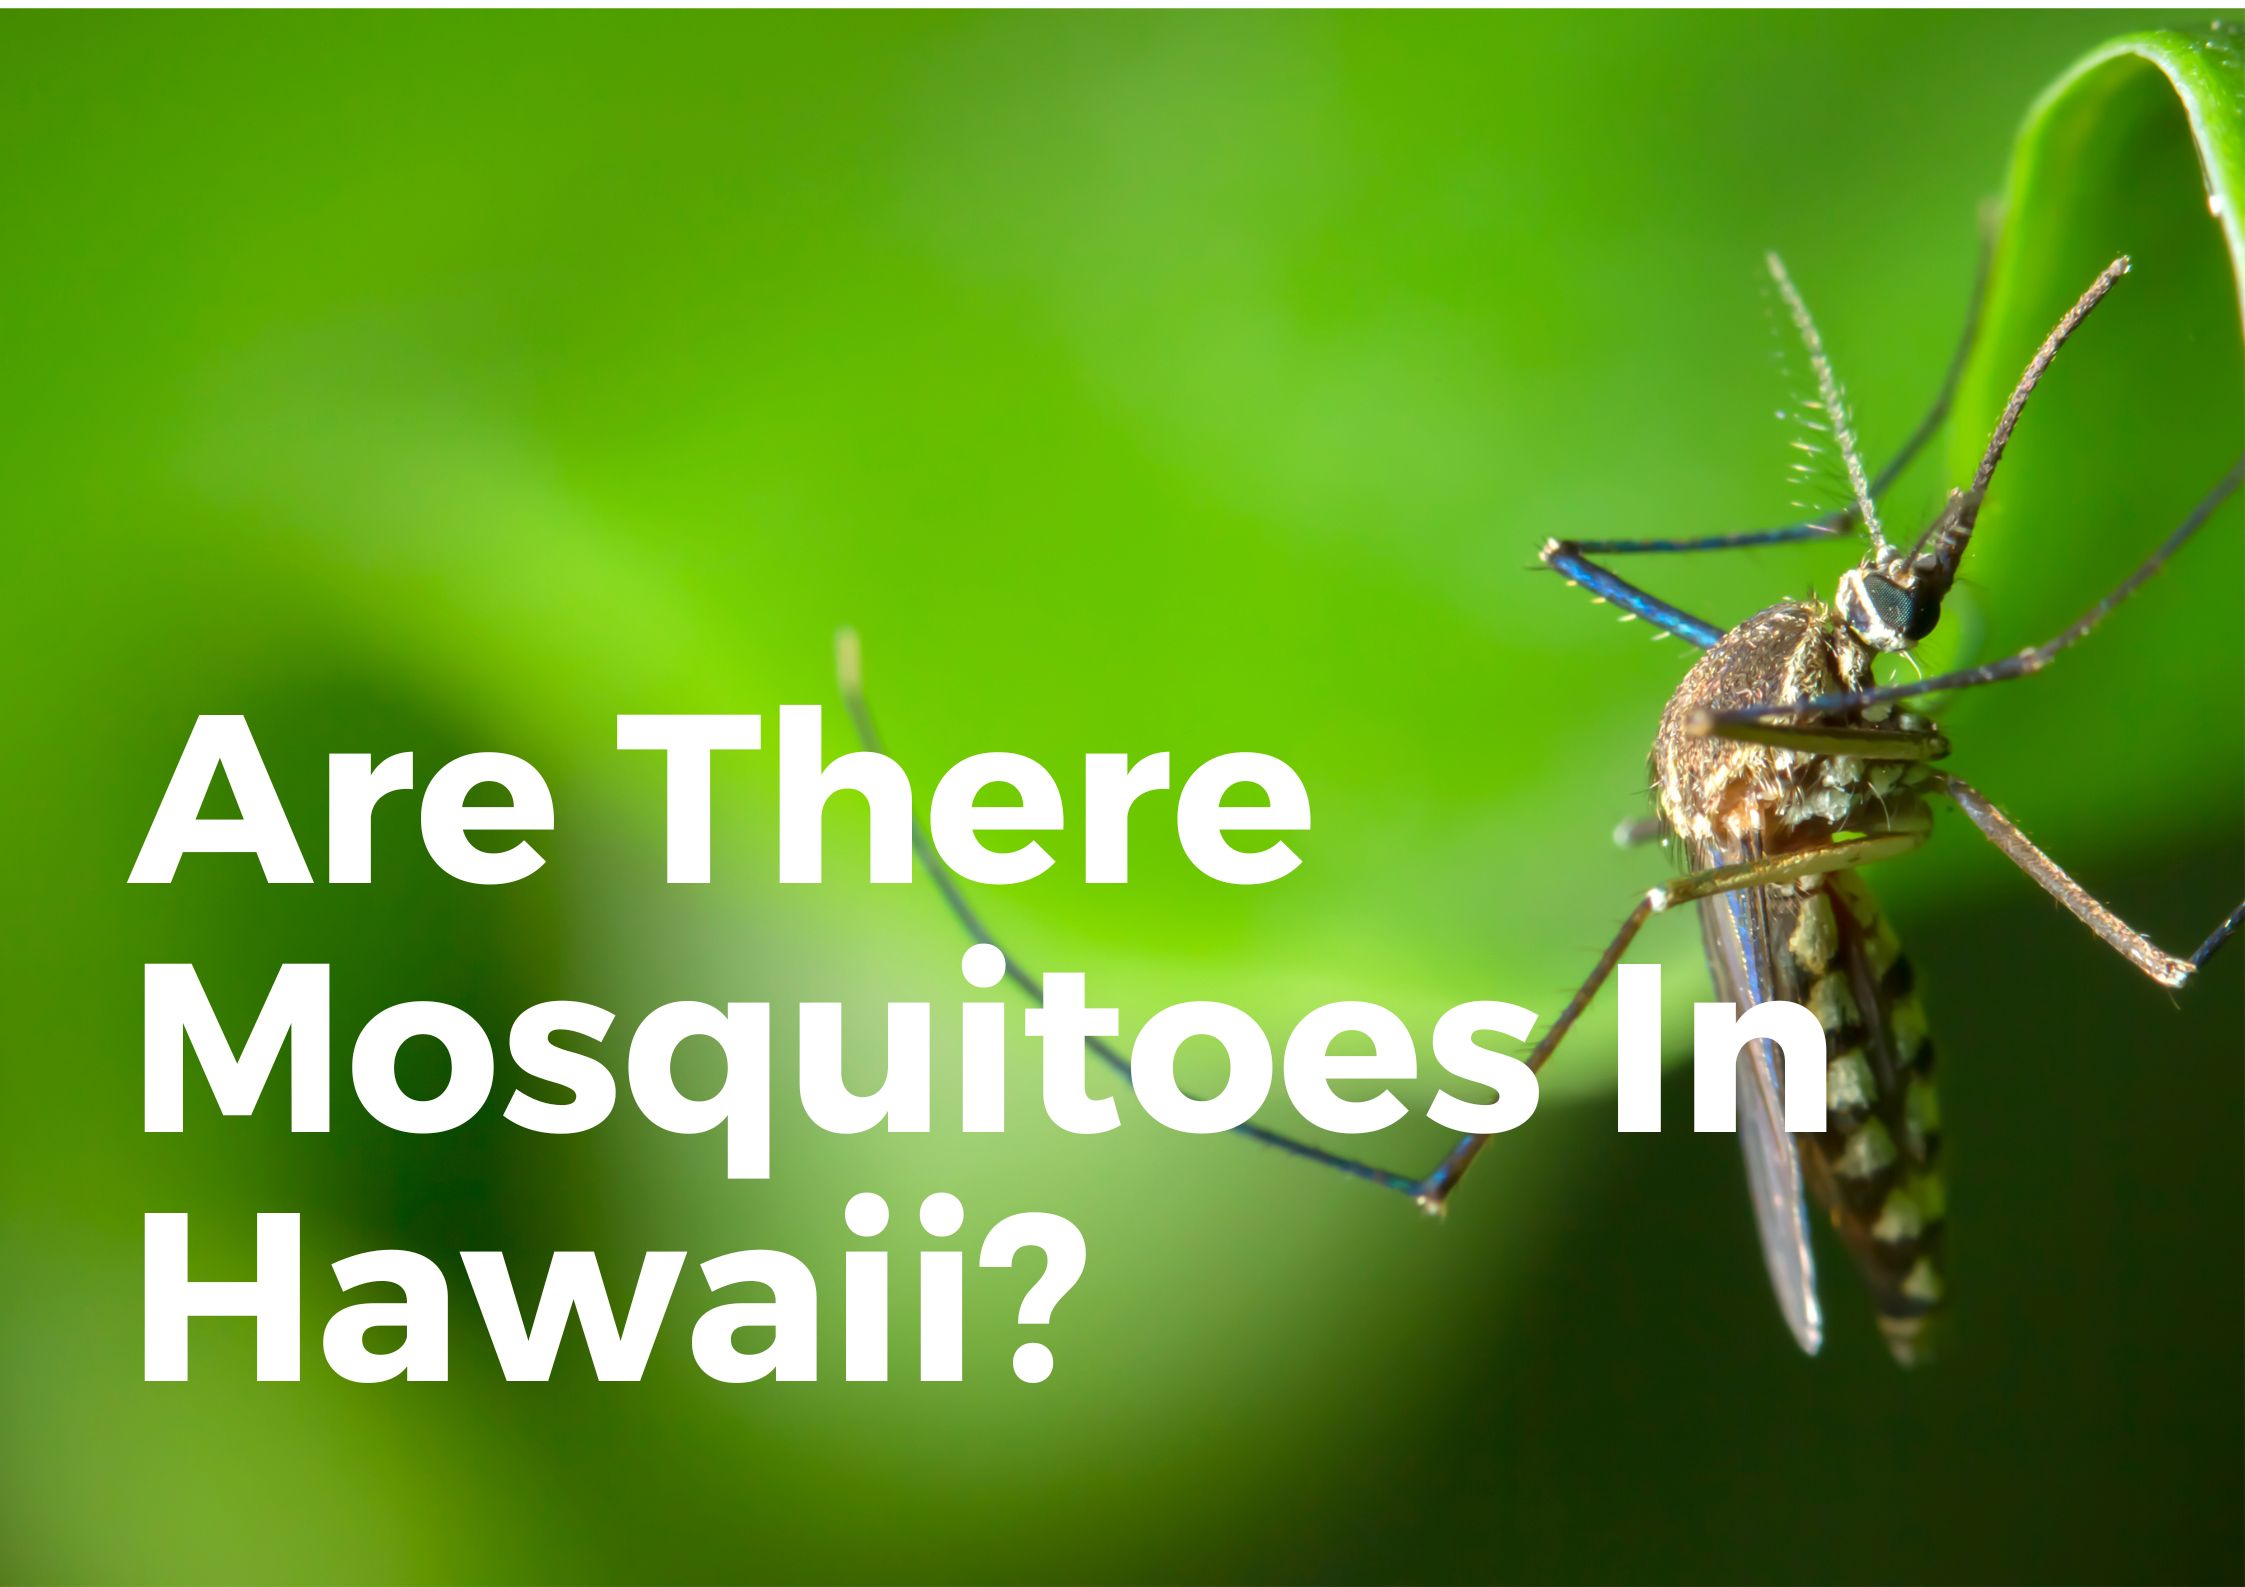 Are there mosquitoes in Hawaii?